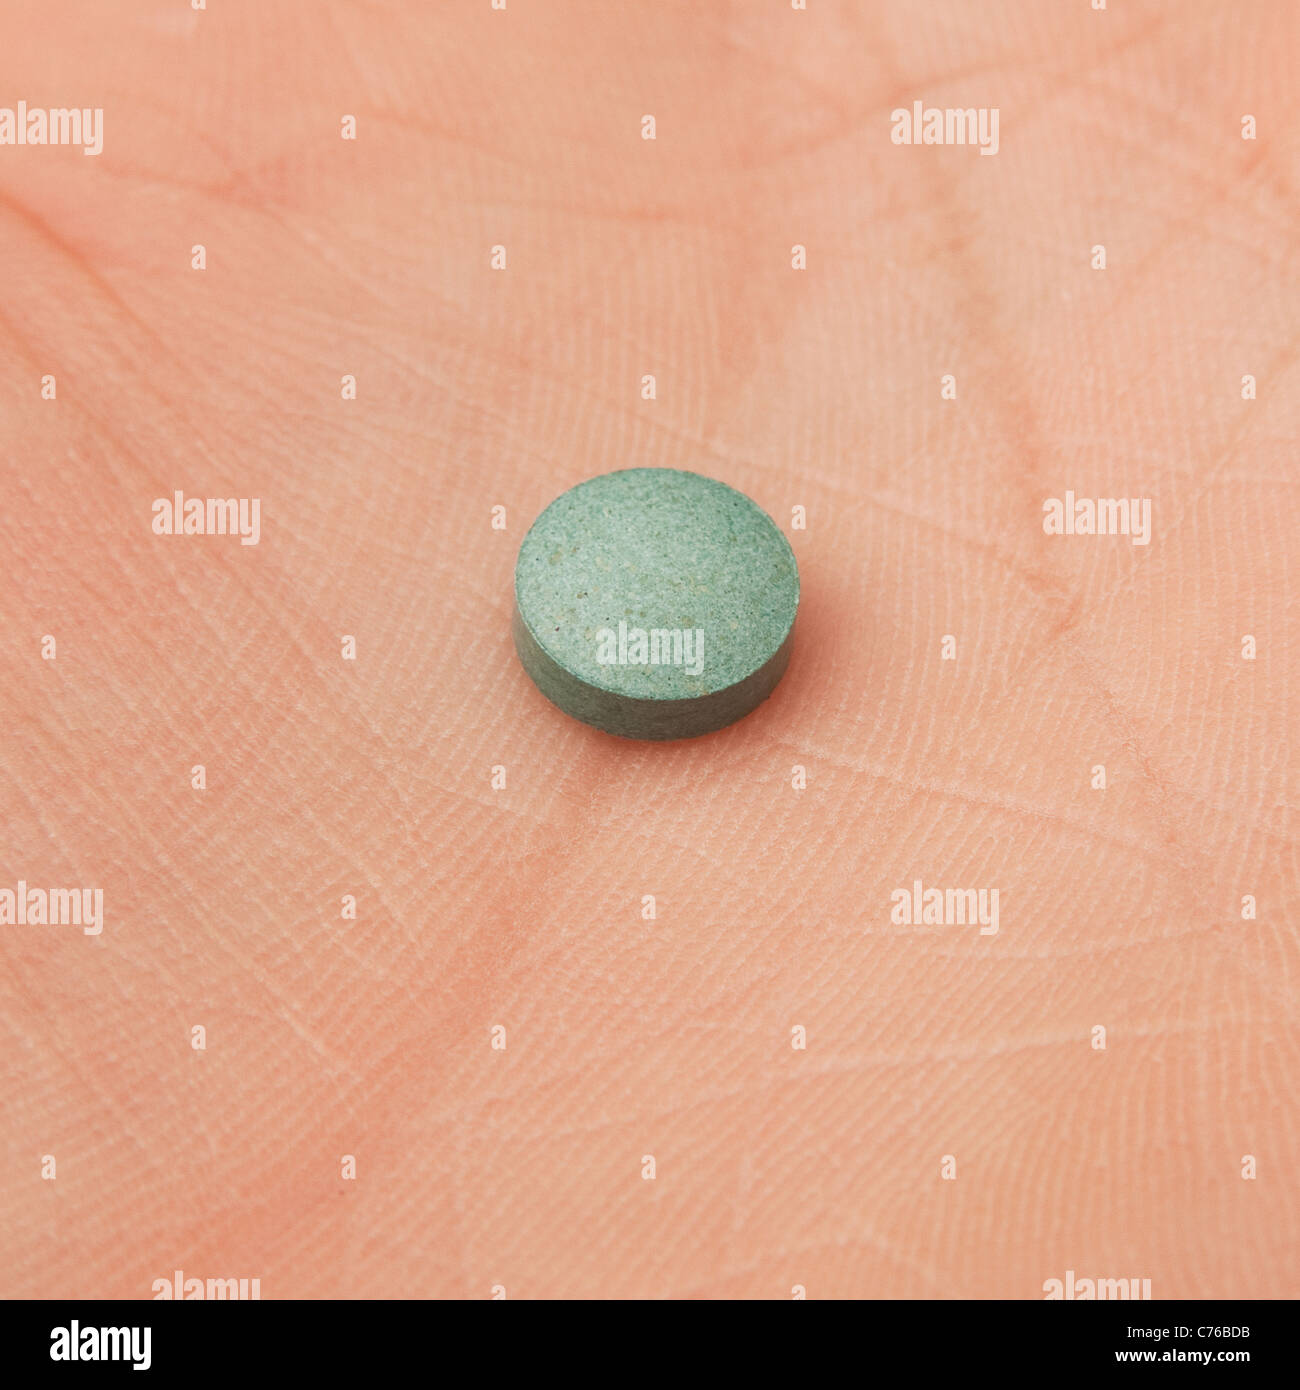 Benzo Fury pellet or pill, (6-APB)  Sold as a  'research chemical' its a analogue of the illegal drug MDMA Stock Photo